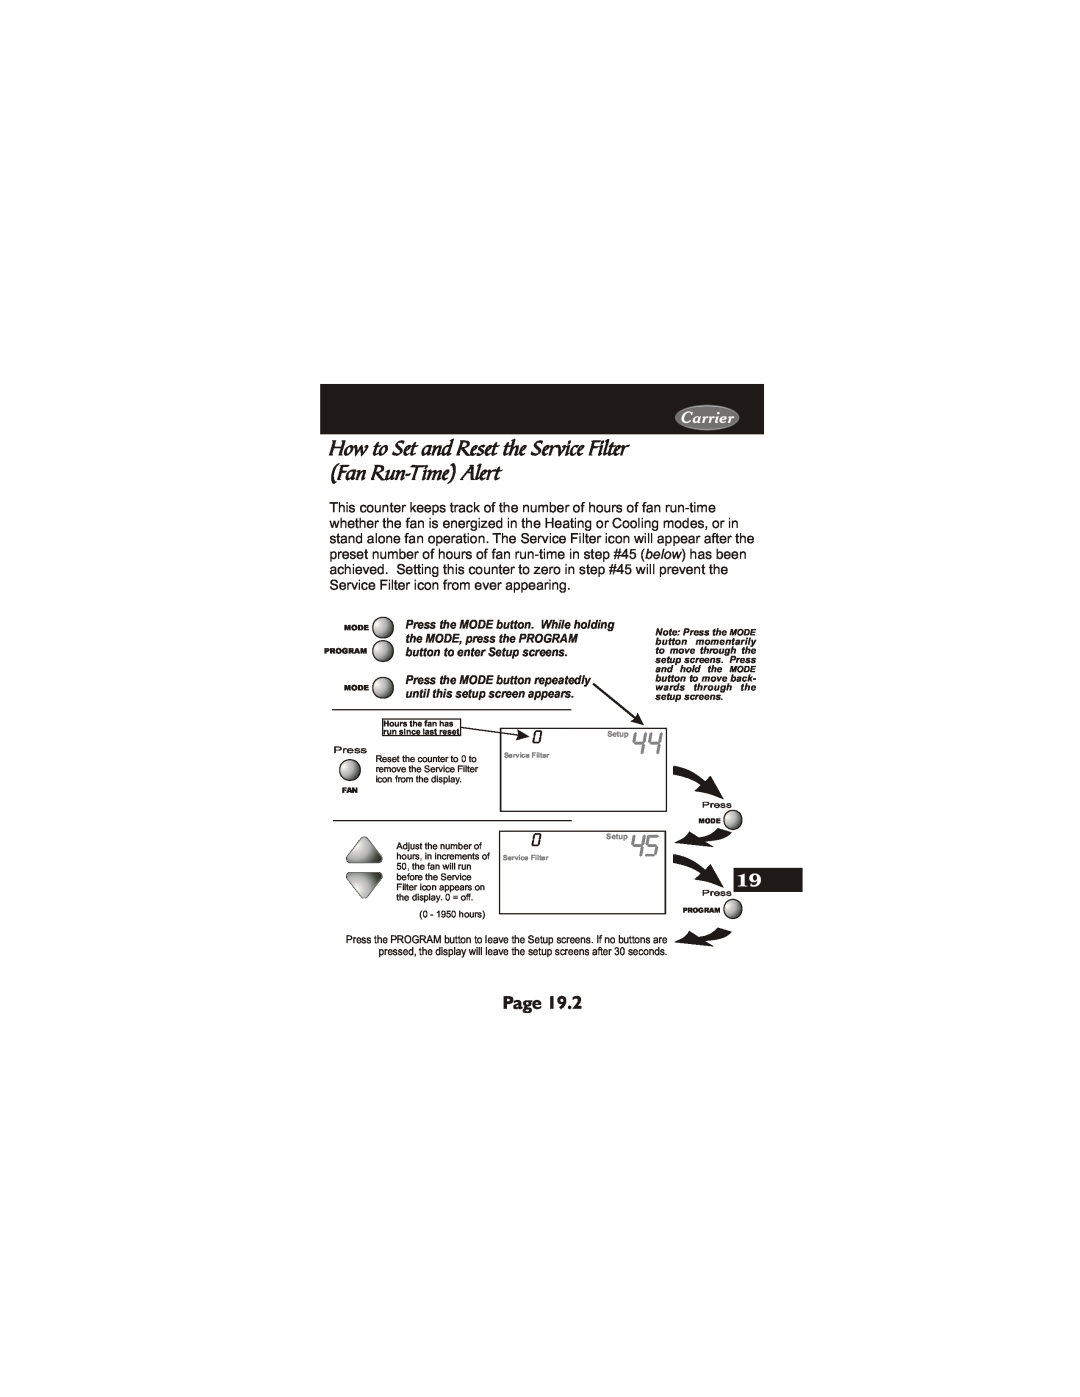 Carrier 33CS450-01 Page, How to Set and Reset the Service Filter Fan Run-Time Alert, Carrier, Hours the fan has 